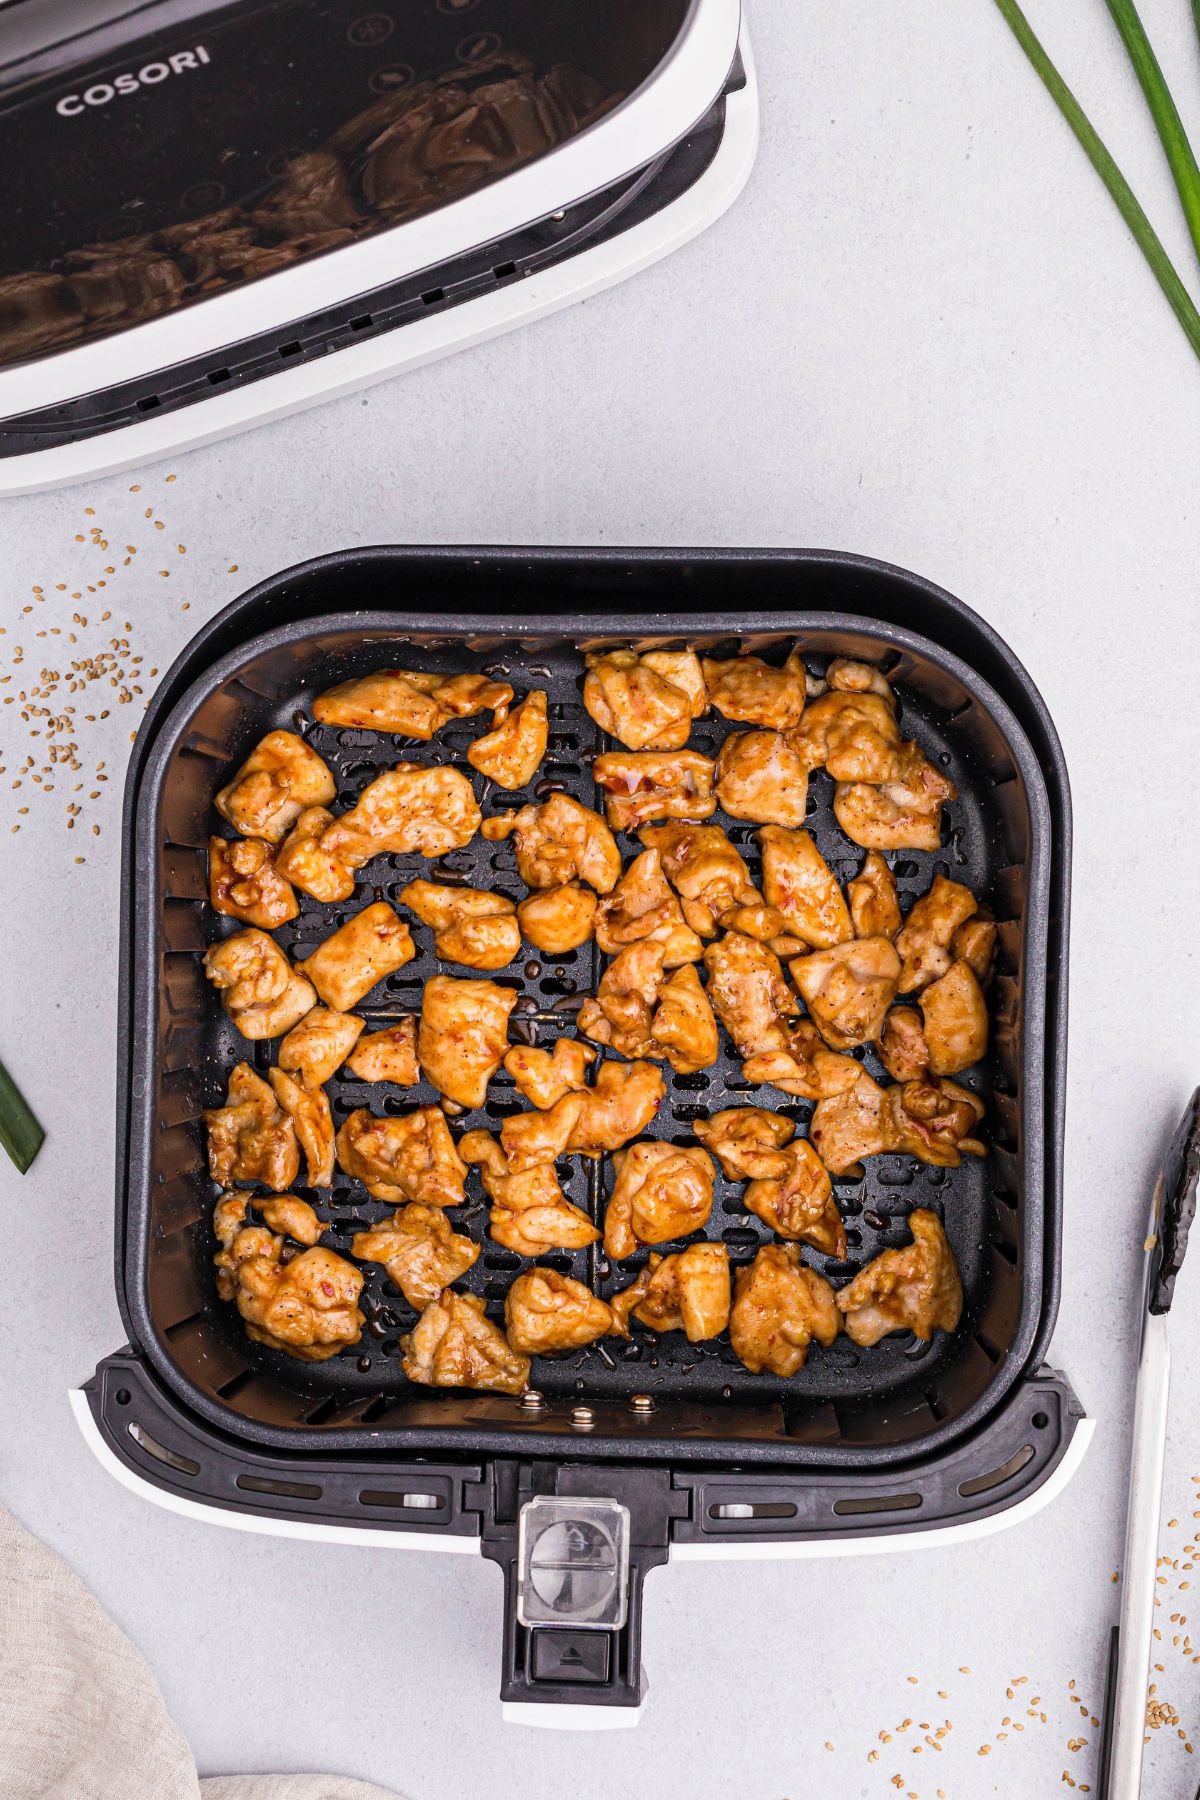 Golden cooked chicken tossed in General Tso's sauce and heated in the air fryer basket.